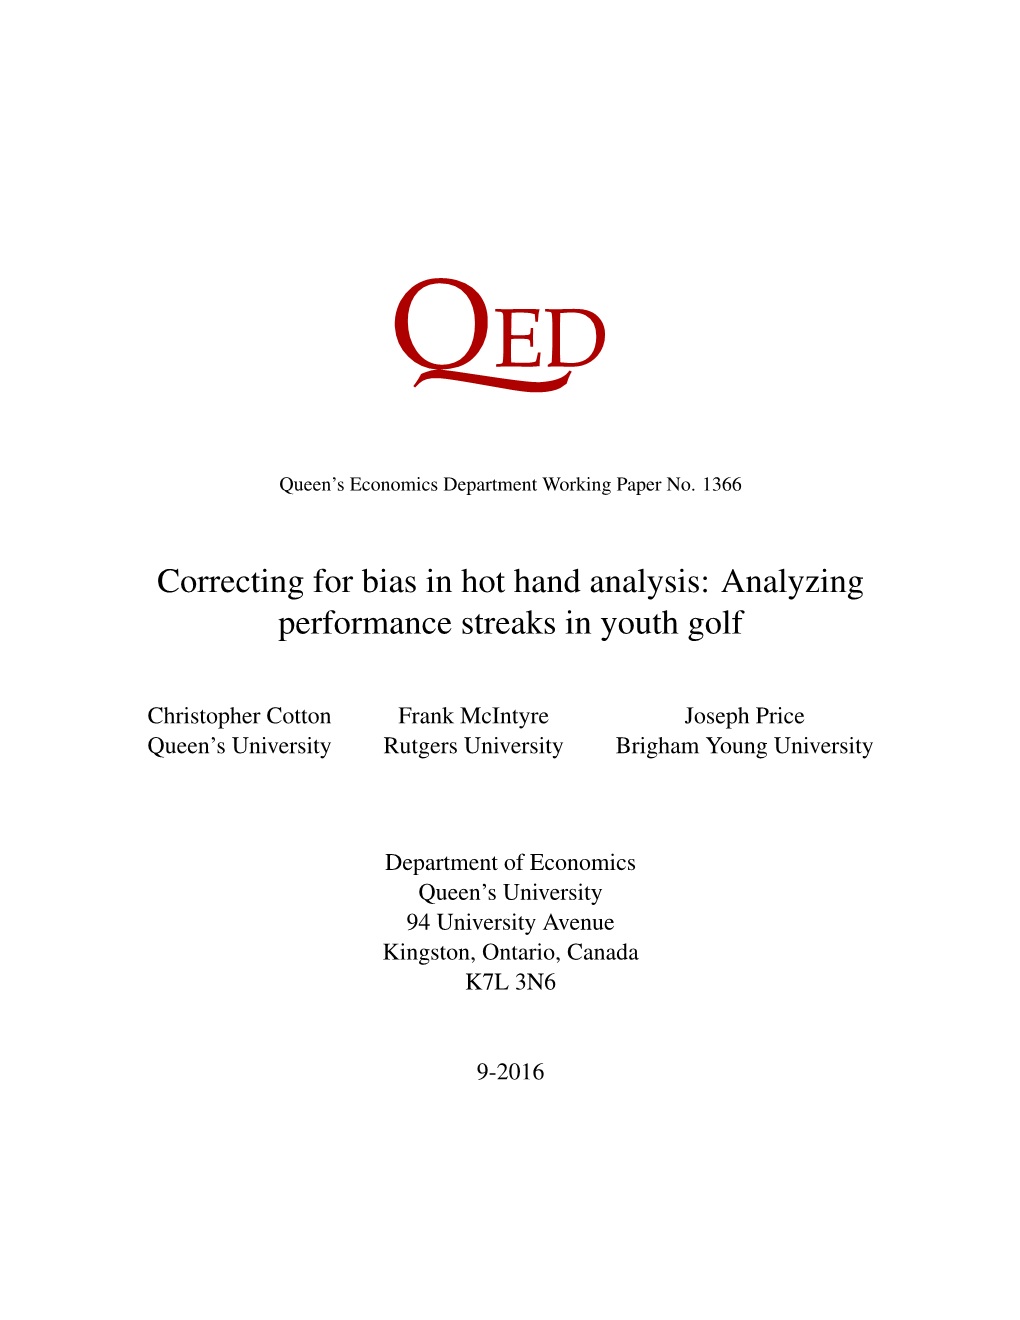 Correcting for Bias in Hot Hand Analysis: Analyzing Performance Streaks in Youth Golf